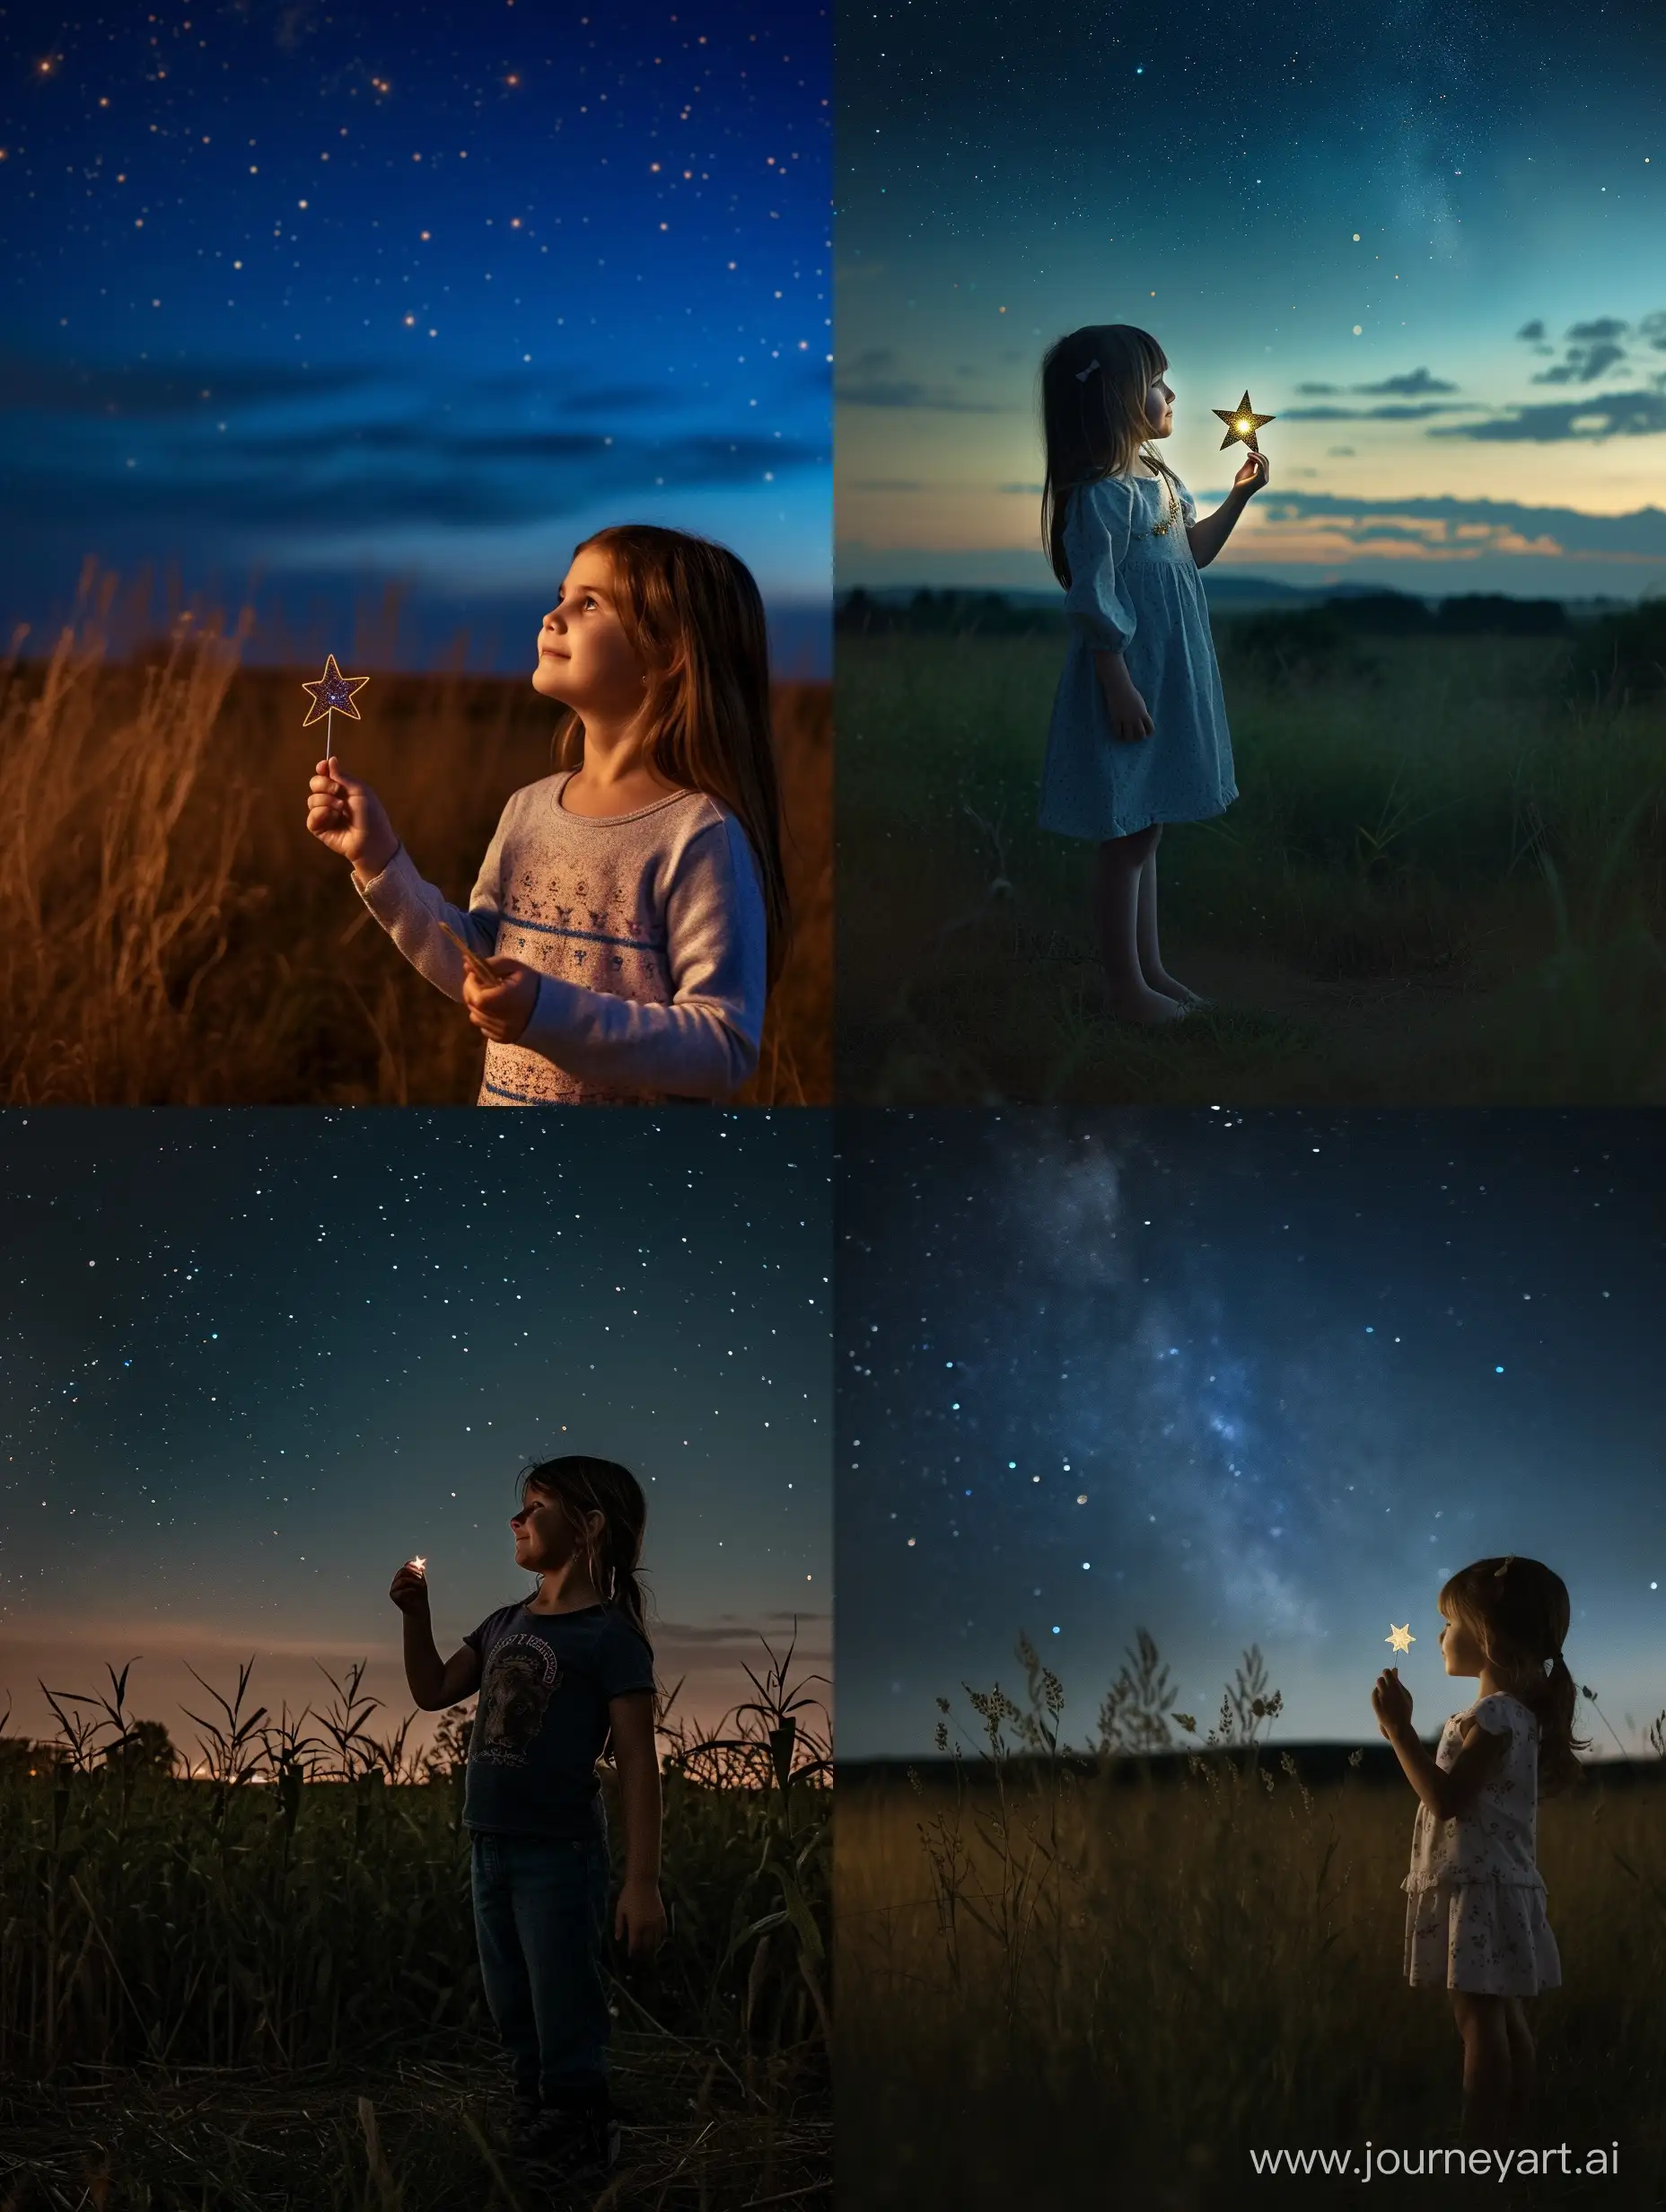 Enchanting-Night-Smiling-Girl-Holding-a-Star-in-a-Starry-Field